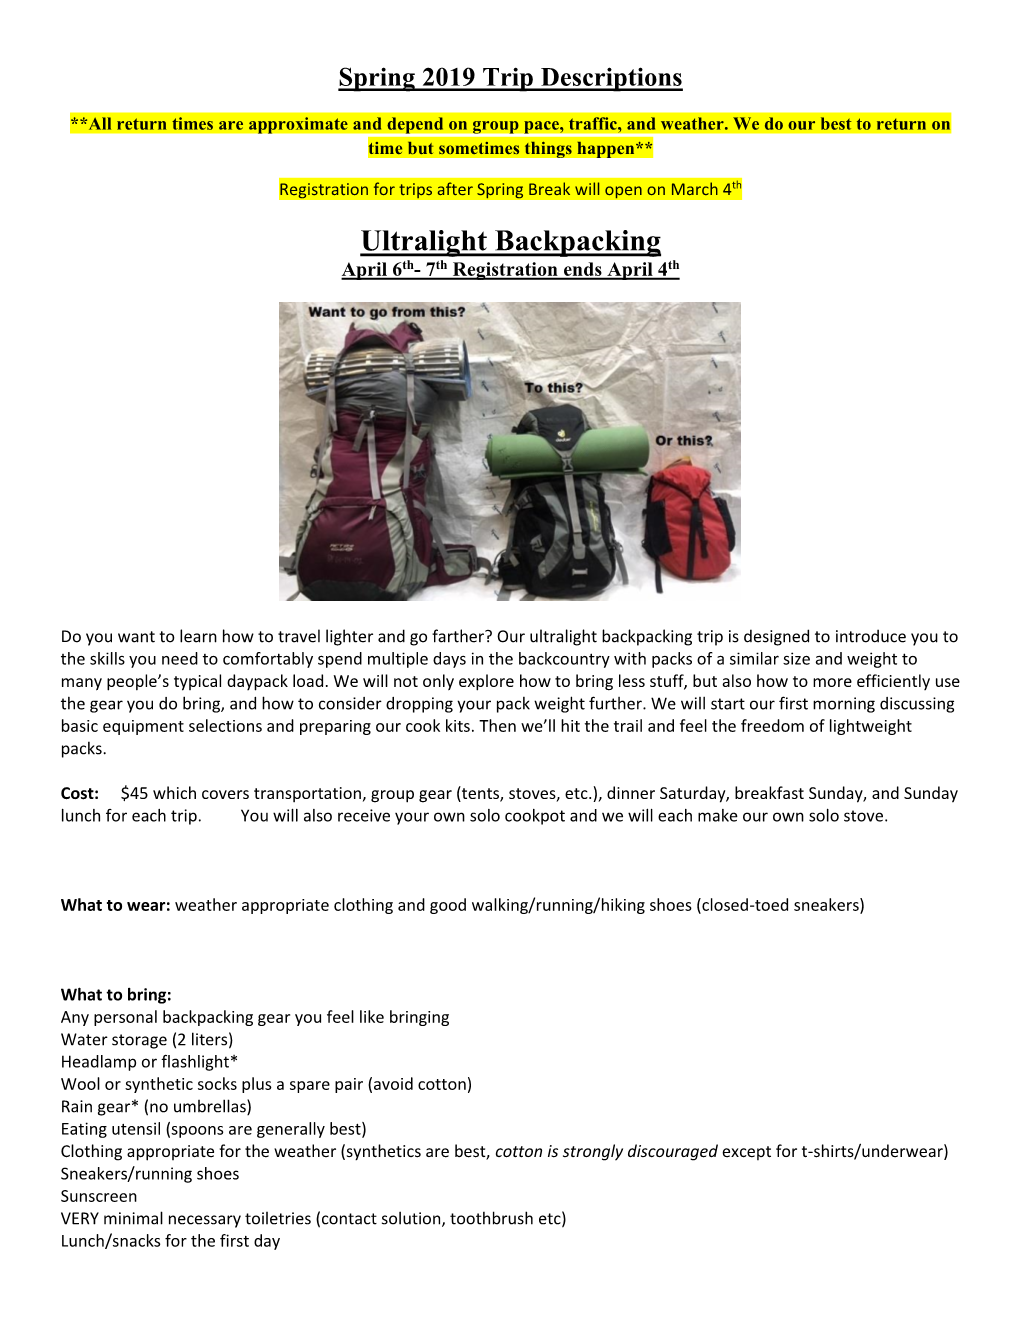 Ultralight Backpacking April 6Th- 7Th Registration Ends April 4Th